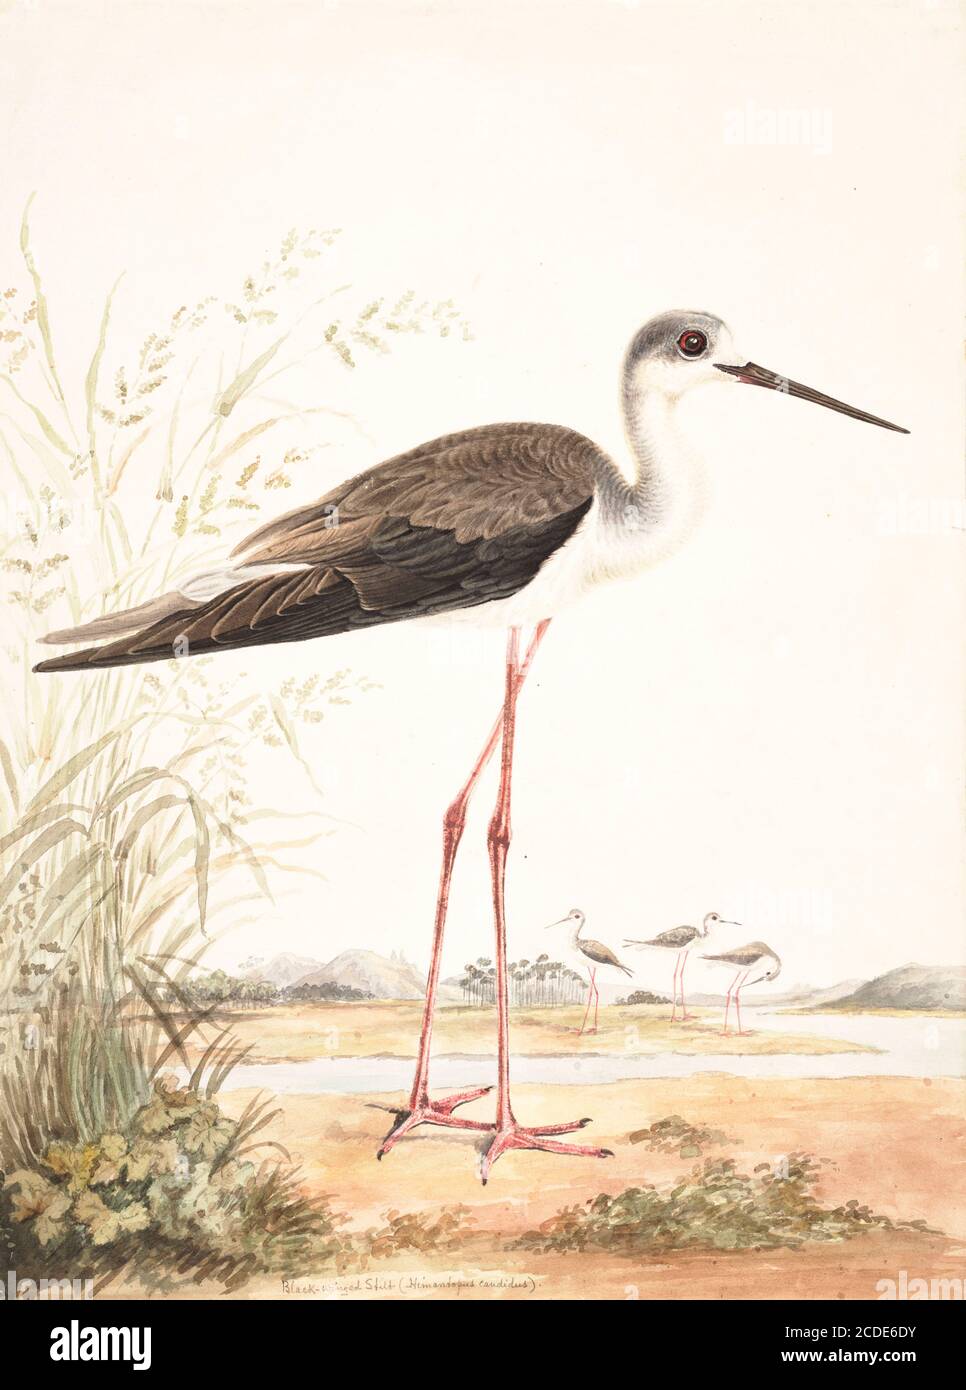 Black-winged stilt (Himantopus himantopus) The black-winged stilt (Himantopus himantopus) is a widely distributed very long-legged wader in the avocet and stilt family (Recurvirostridae). 18th century watercolor painting by Elizabeth Gwillim. Lady Elizabeth Symonds Gwillim (21 April 1763 – 21 December 1807) was an artist married to Sir Henry Gwillim, Puisne Judge at the Madras high court until 1808. Lady Gwillim painted a series of about 200 watercolours of Indian birds. Produced about 20 years before John James Audubon, her work has been acclaimed for its accuracy and natural postures as they Stock Photo